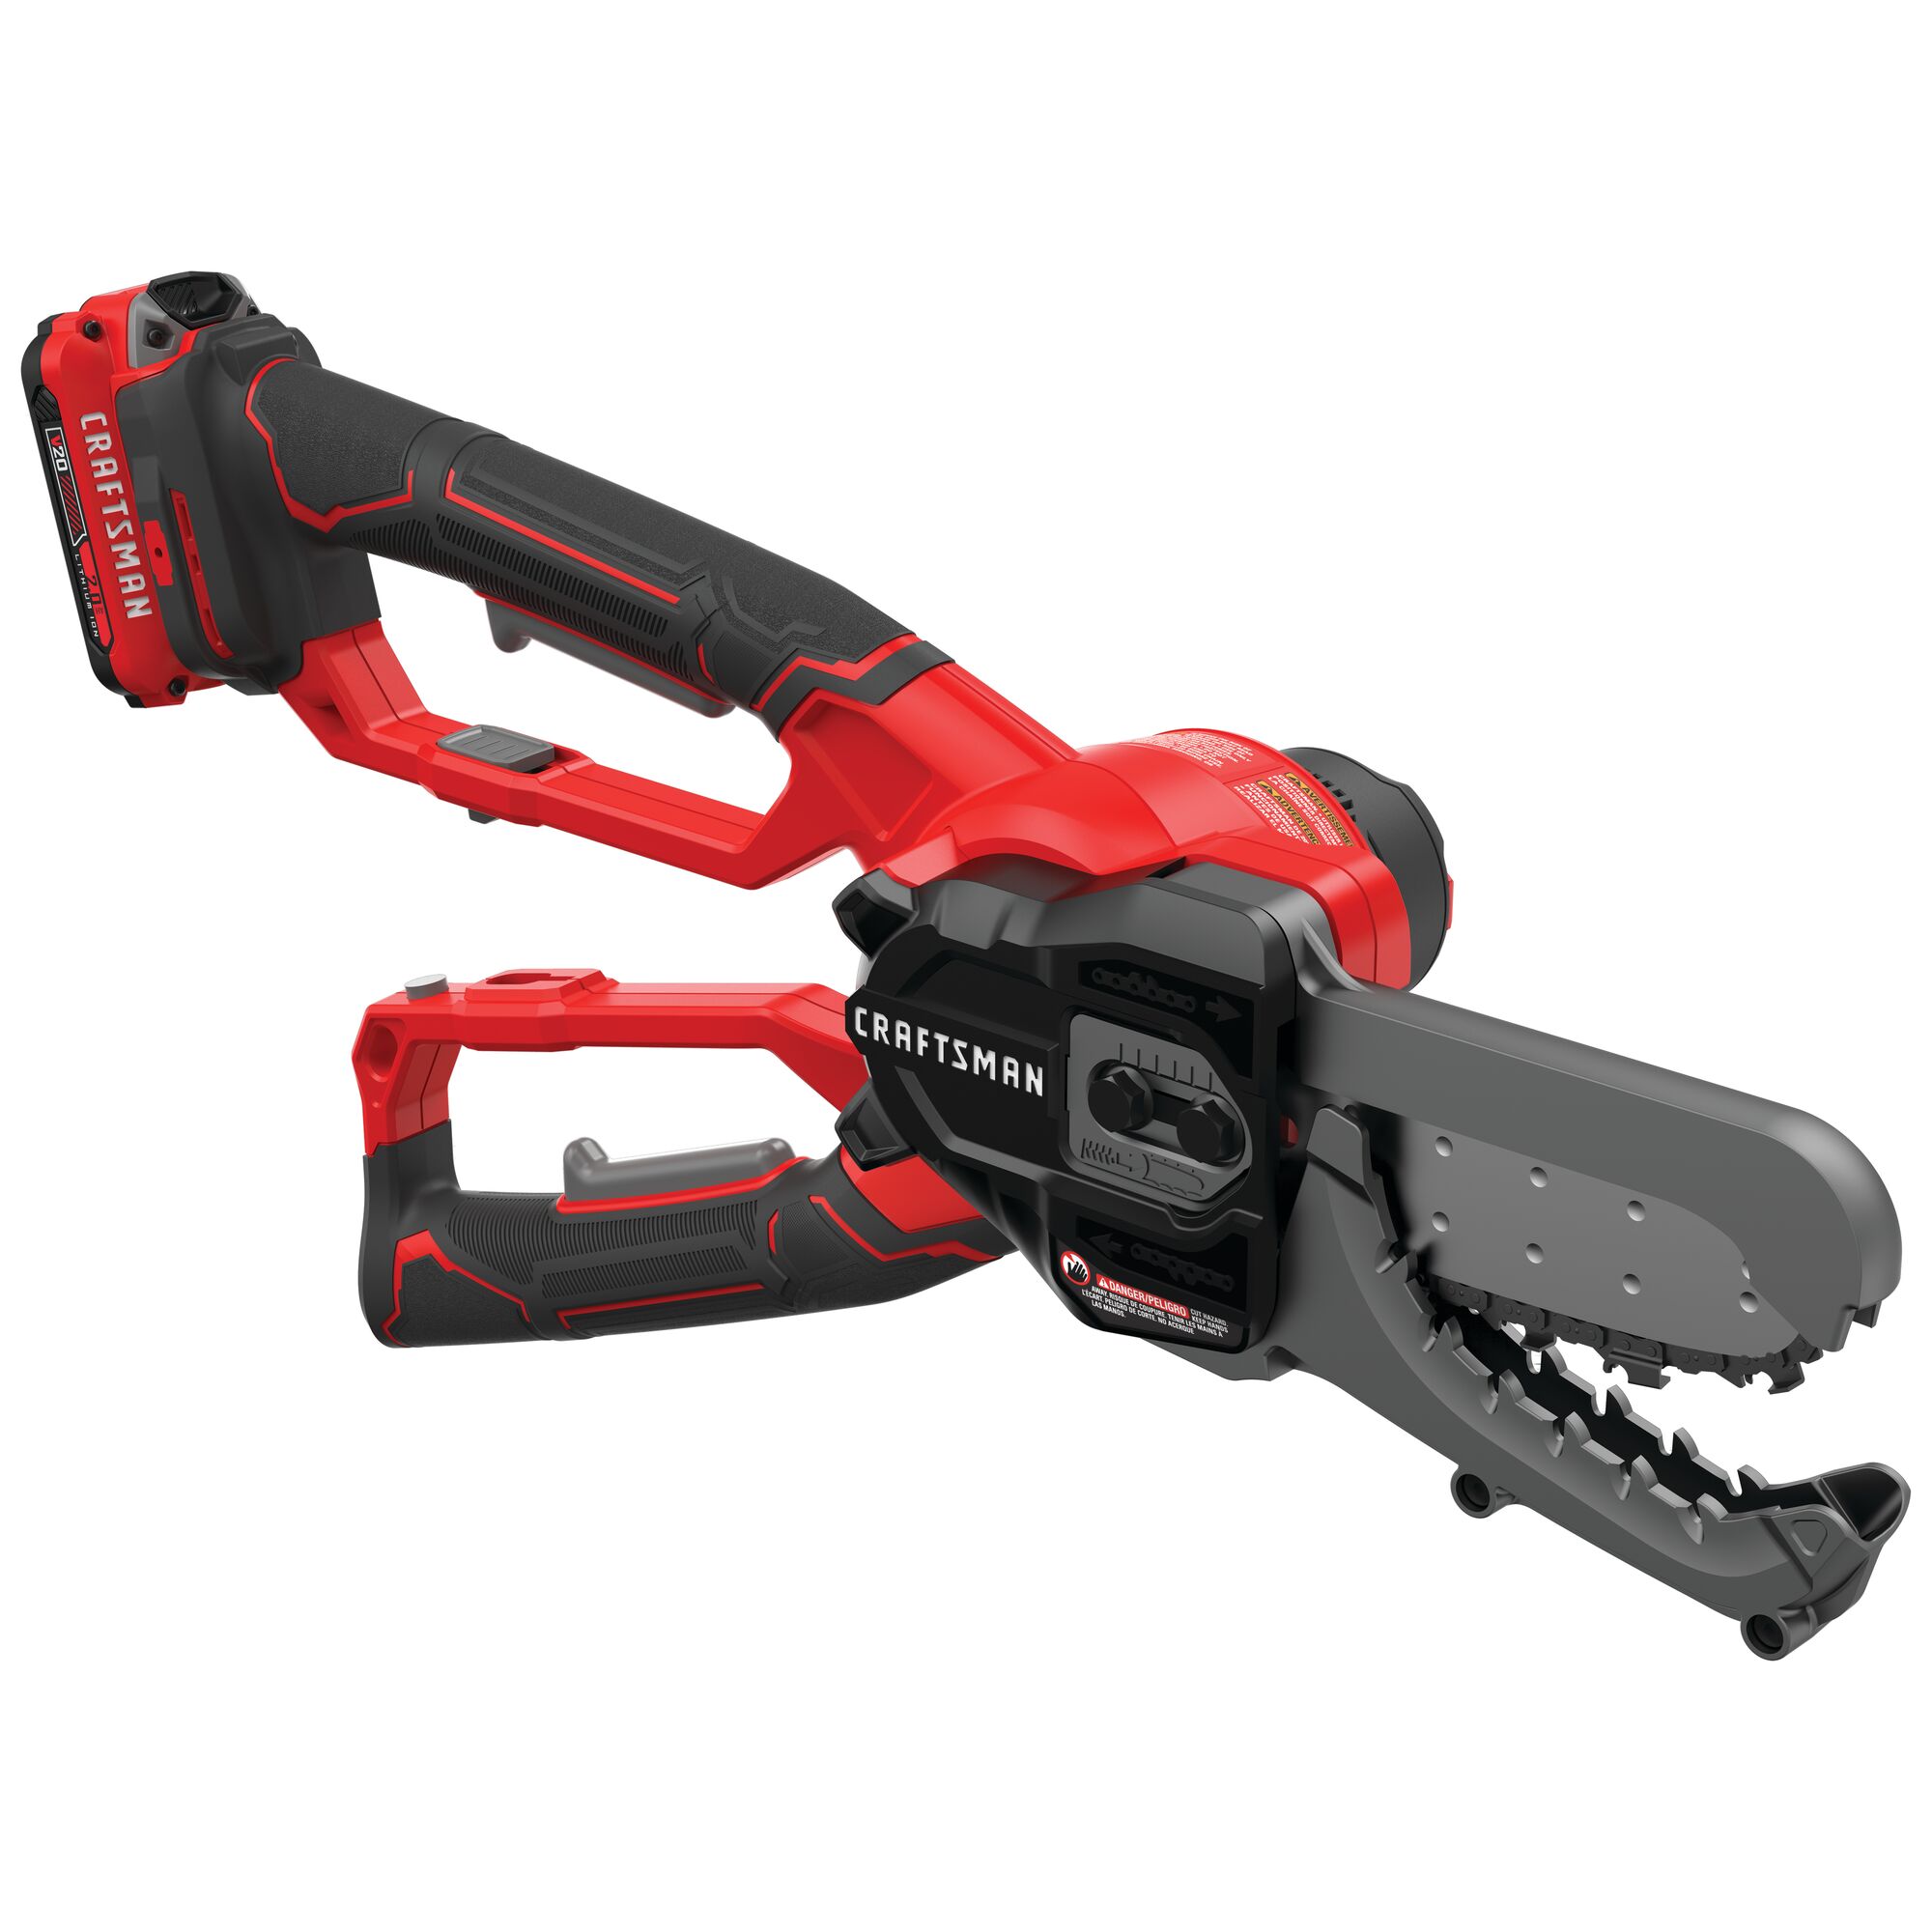 6 inch cordless compact chainsaw lopper kit 2 amp hour.